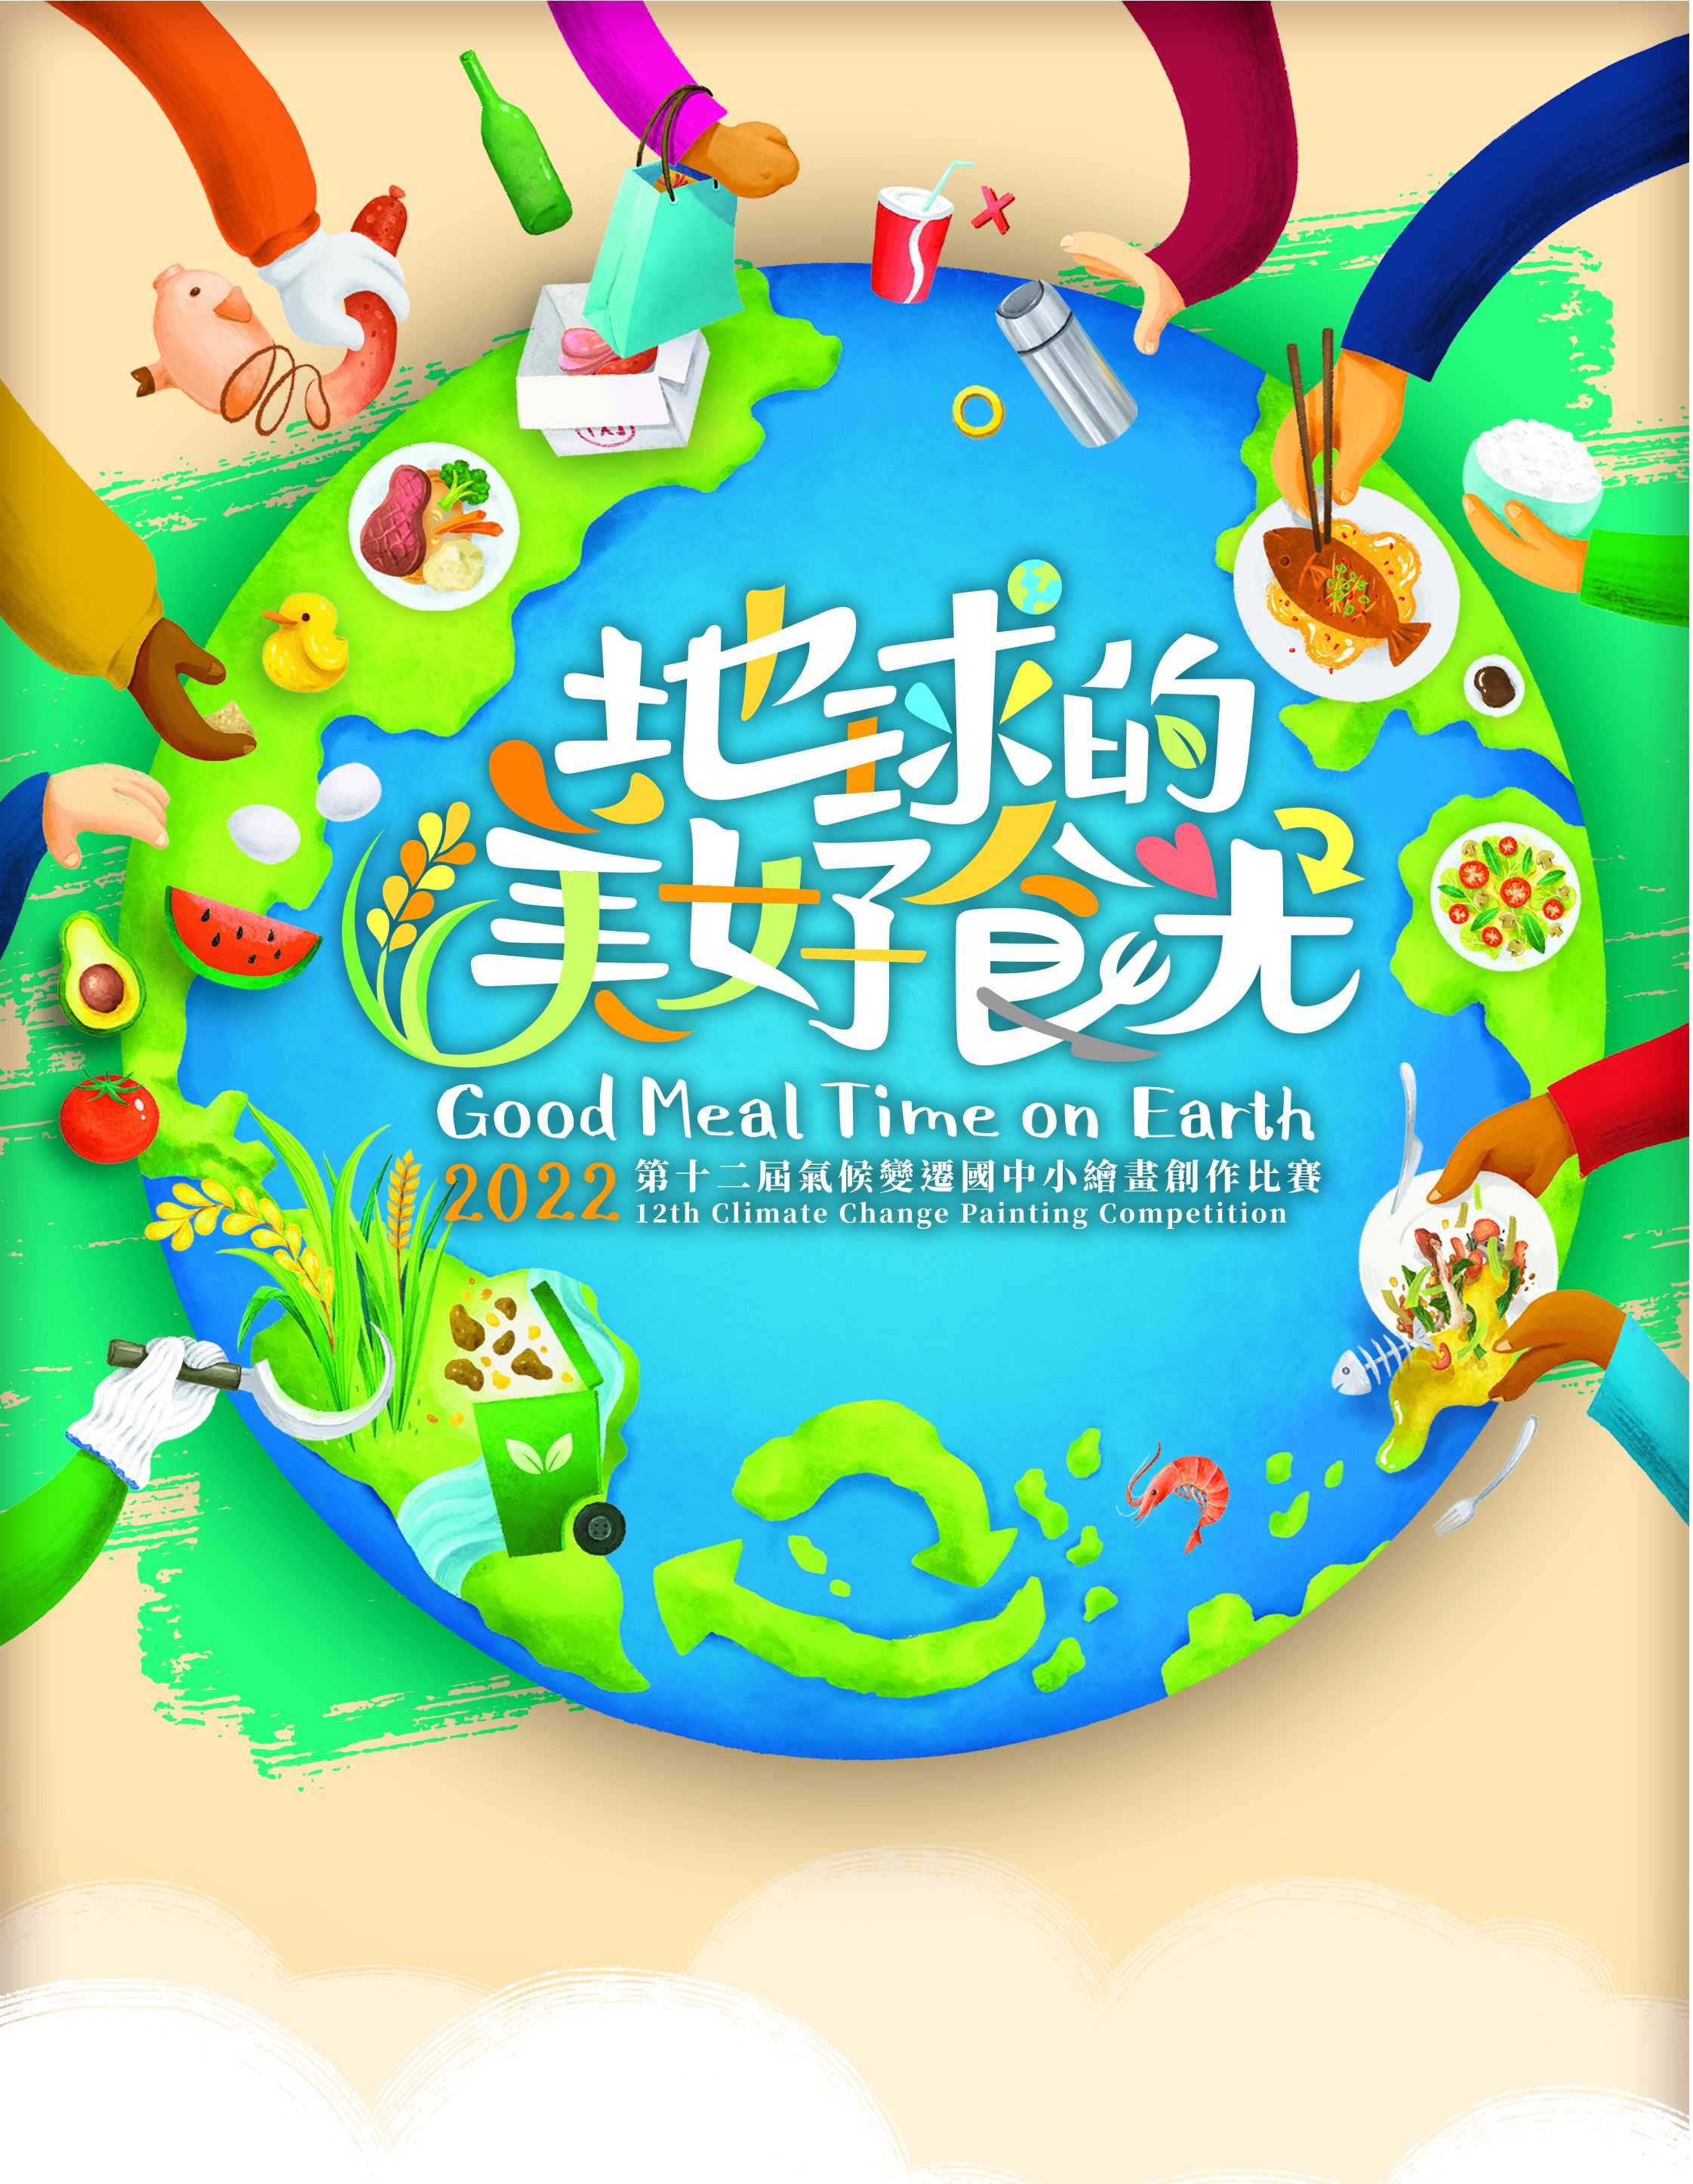 【Good Meal Time on Earth】12th Climate Change Painting Competition